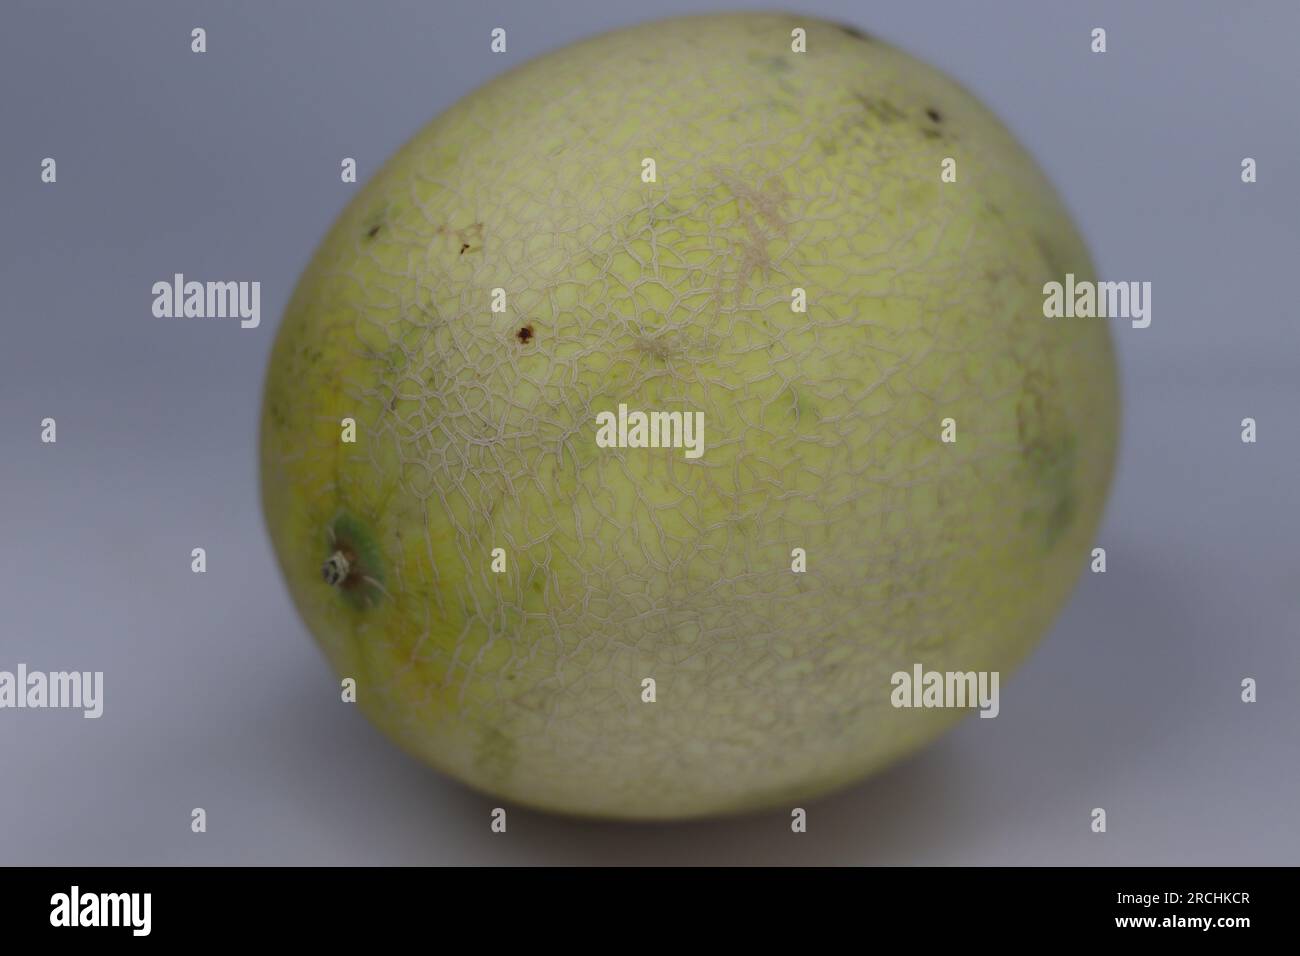 Honeydew Melon. It is one of the two main cultivar types in Cucumis melo Inodorus Group. It is characterized by the smooth rind and lack of musky odou Stock Photo